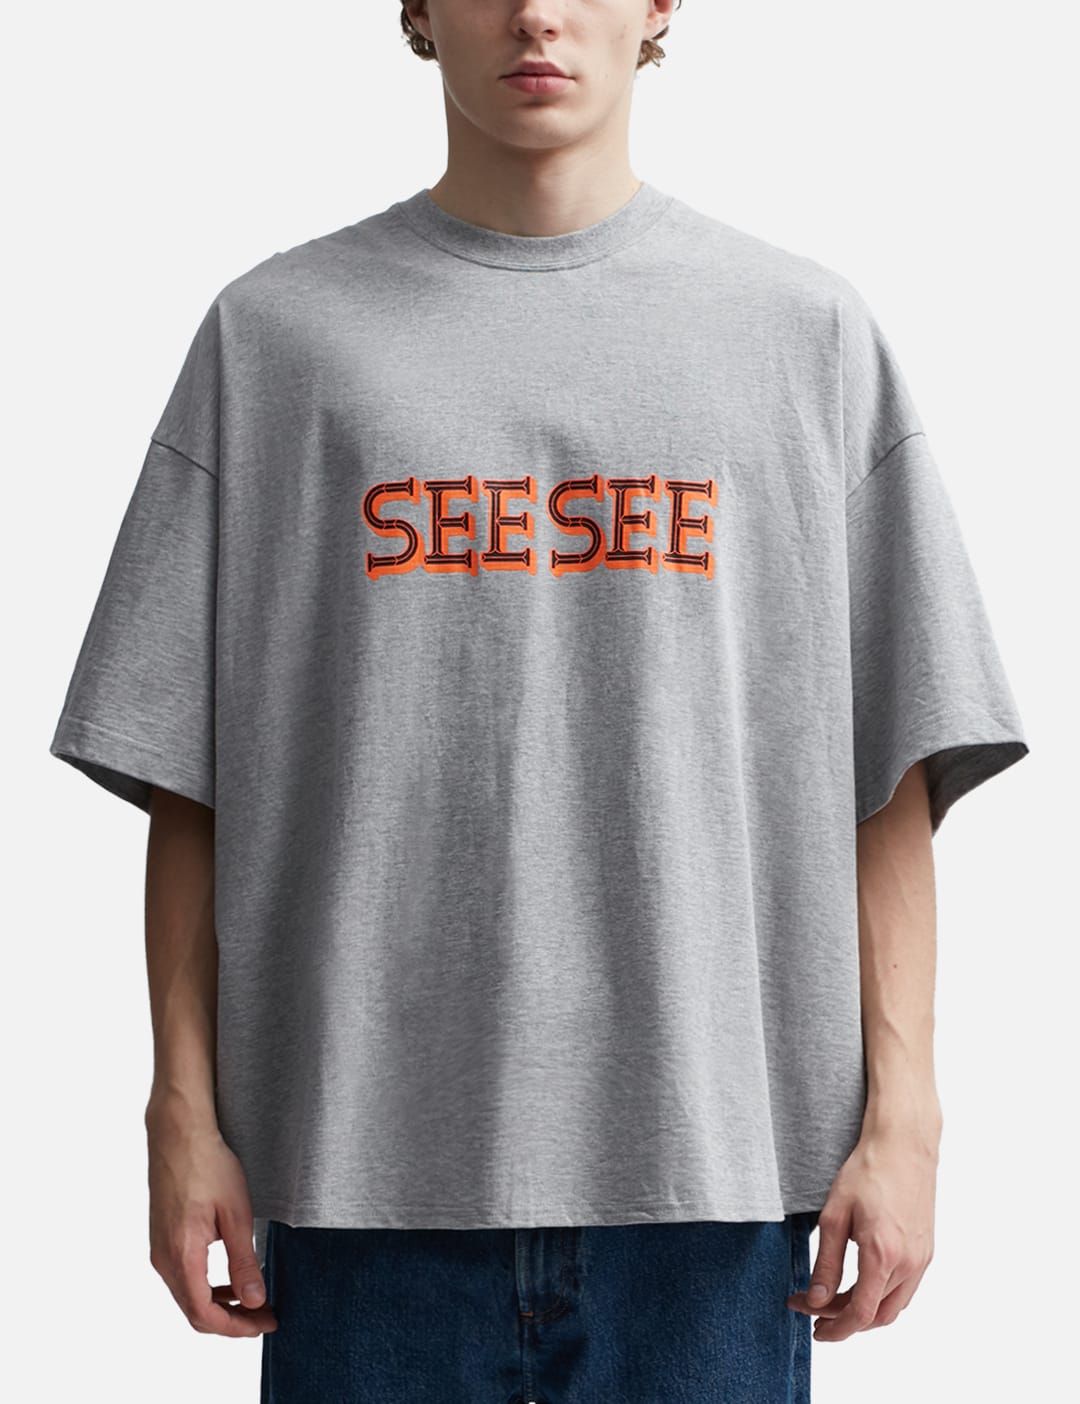 SEE SEE - Super Big Short Sleeve T-shirt | HBX - Globally Curated 